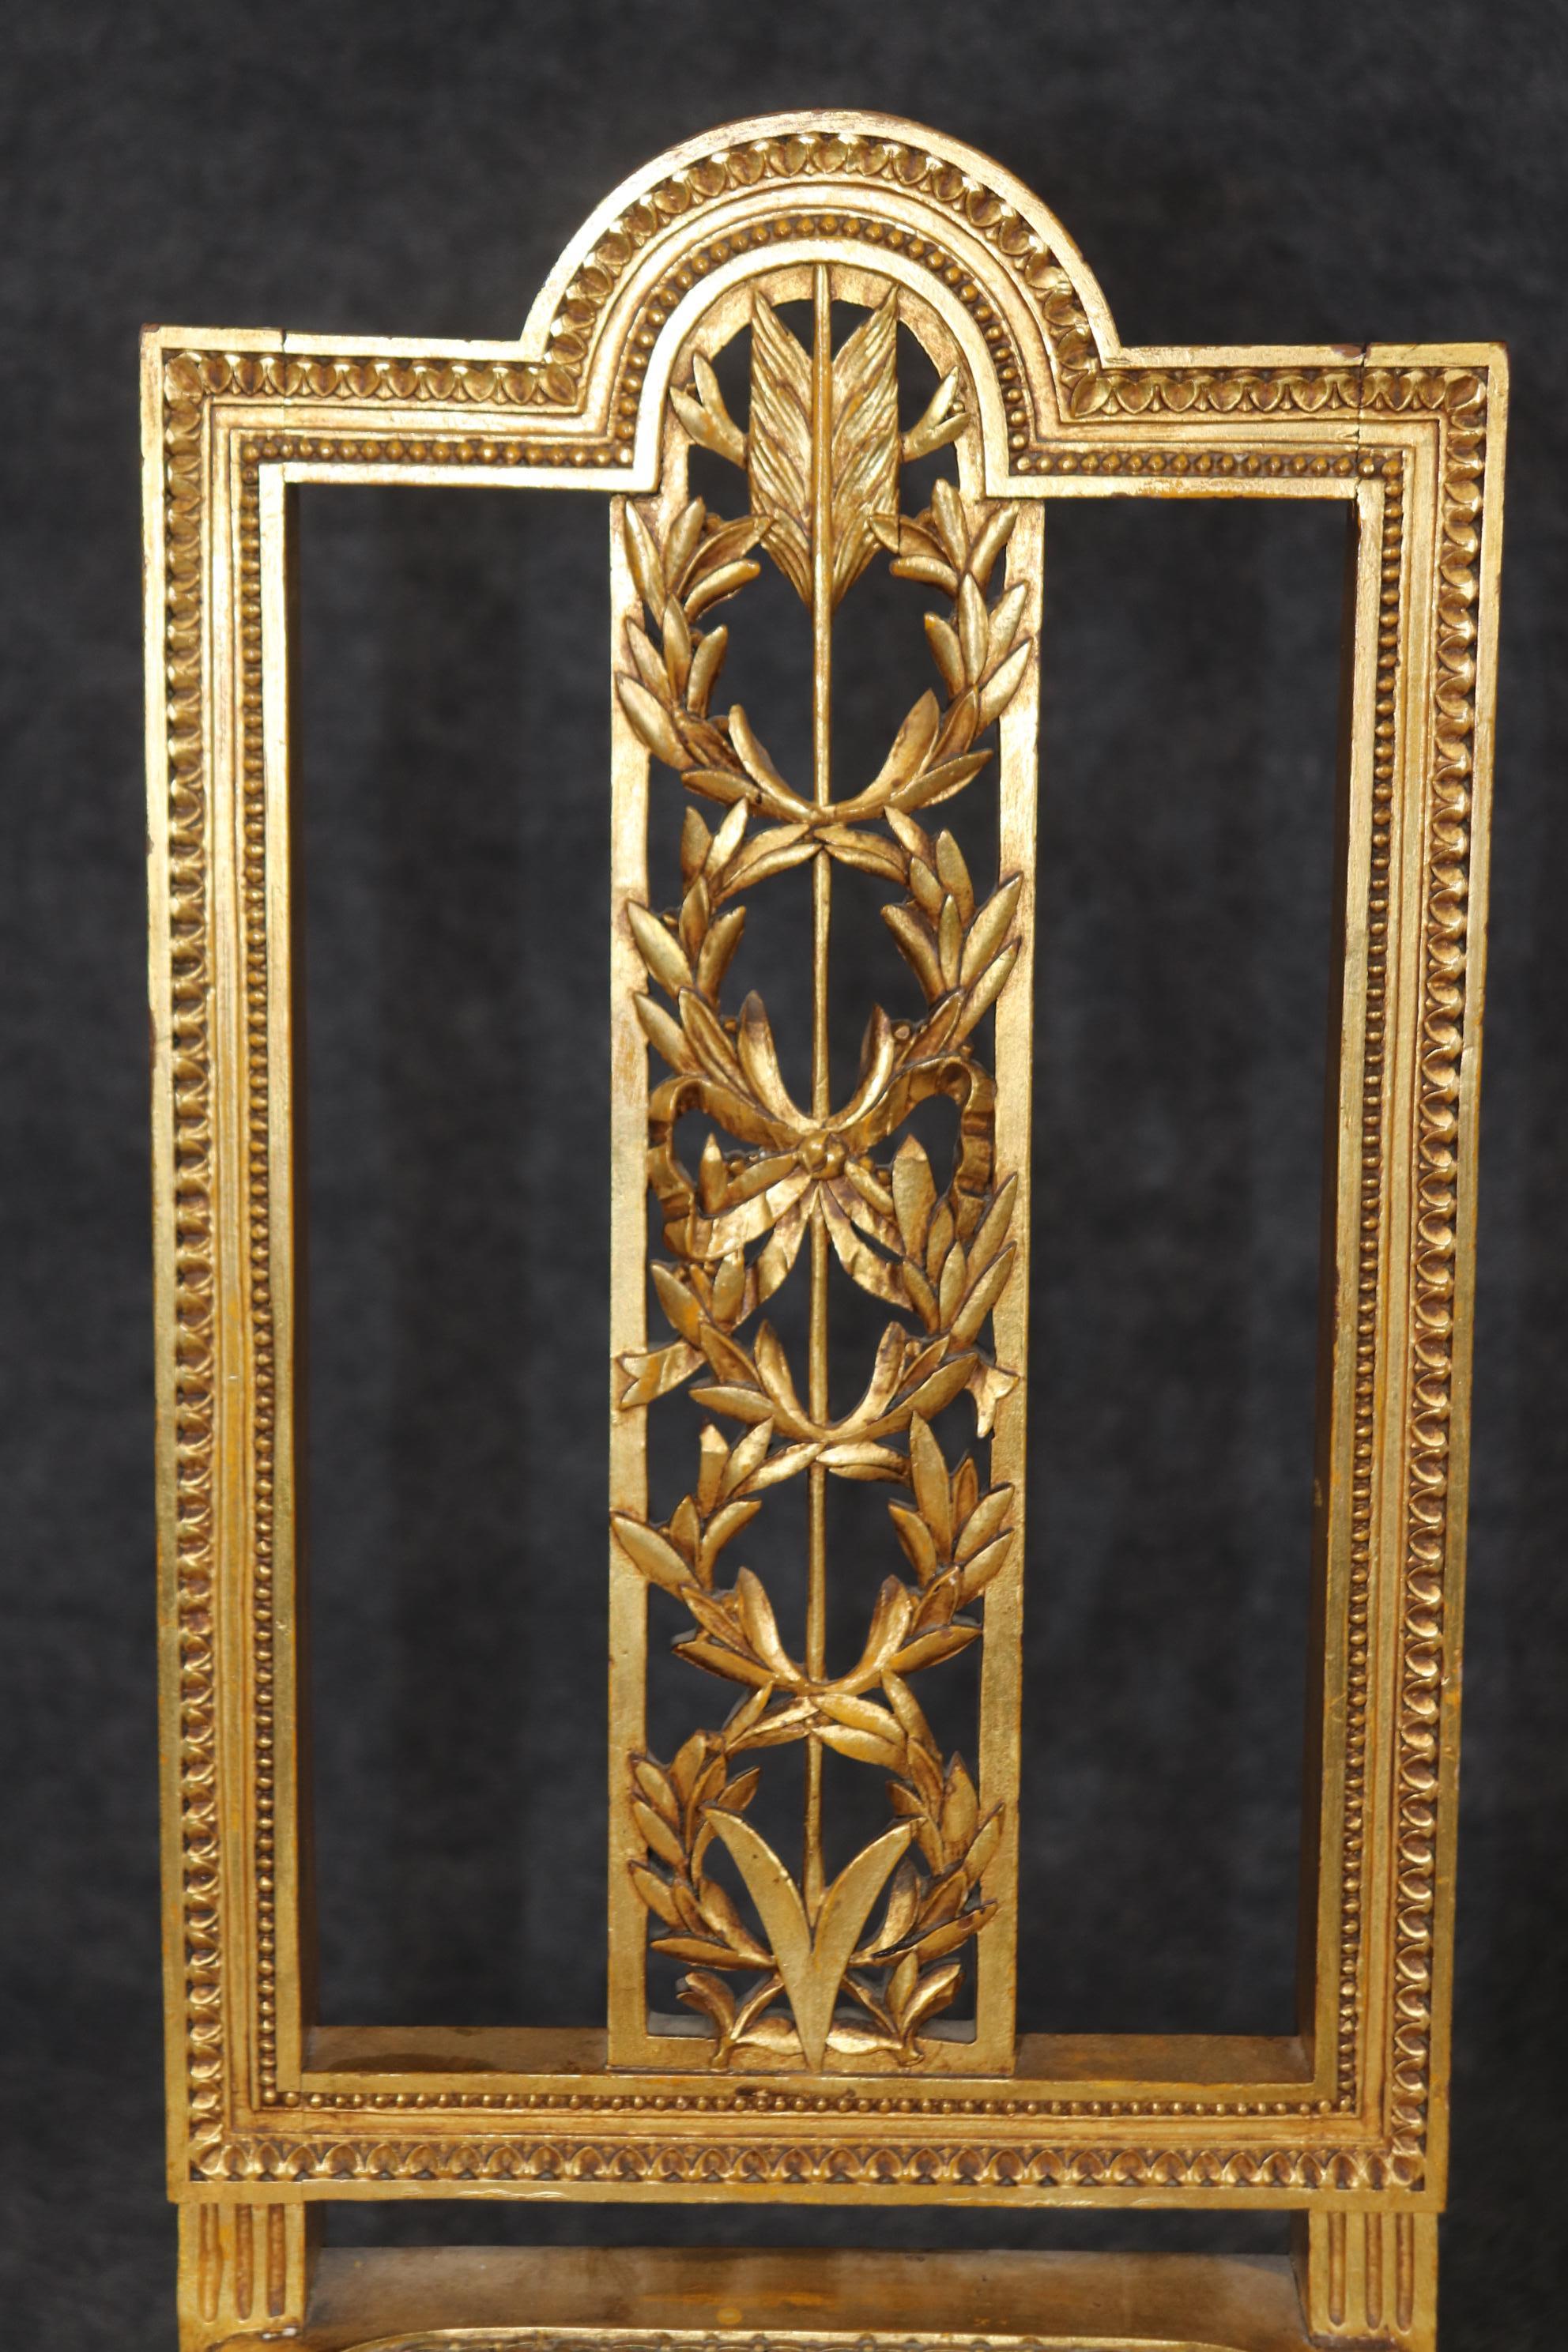 These are absolutely luminous and bright genuine gold leaf gilt carved arrow and floral motif side chairs. They are perfect for use in a foyer as entry way chairs or for a bedroom. The seats are in good condition with minor but stable cane breakage